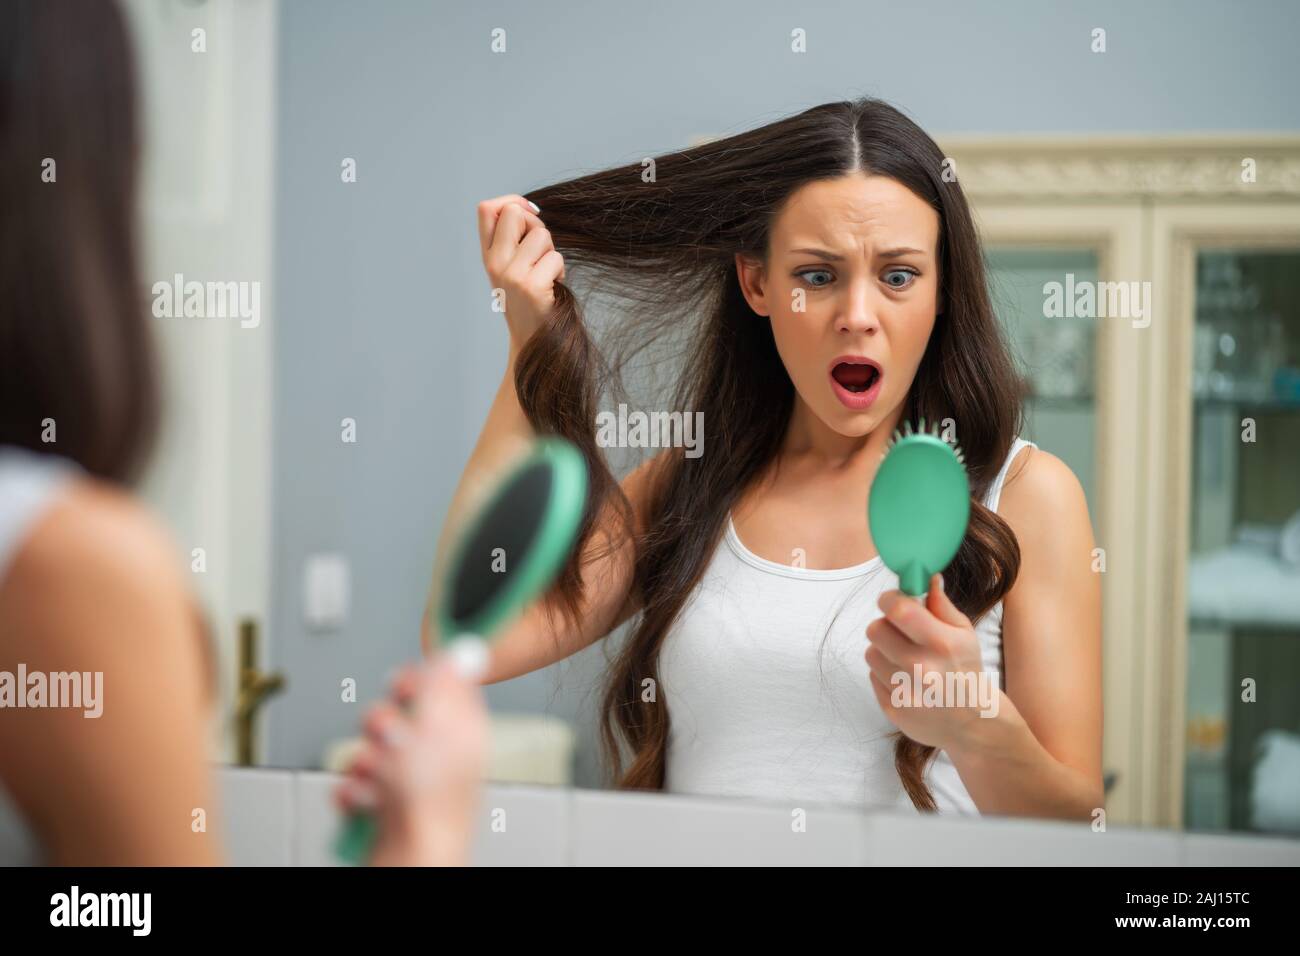 Young woman is in panic because of hair loss. Stock Photo